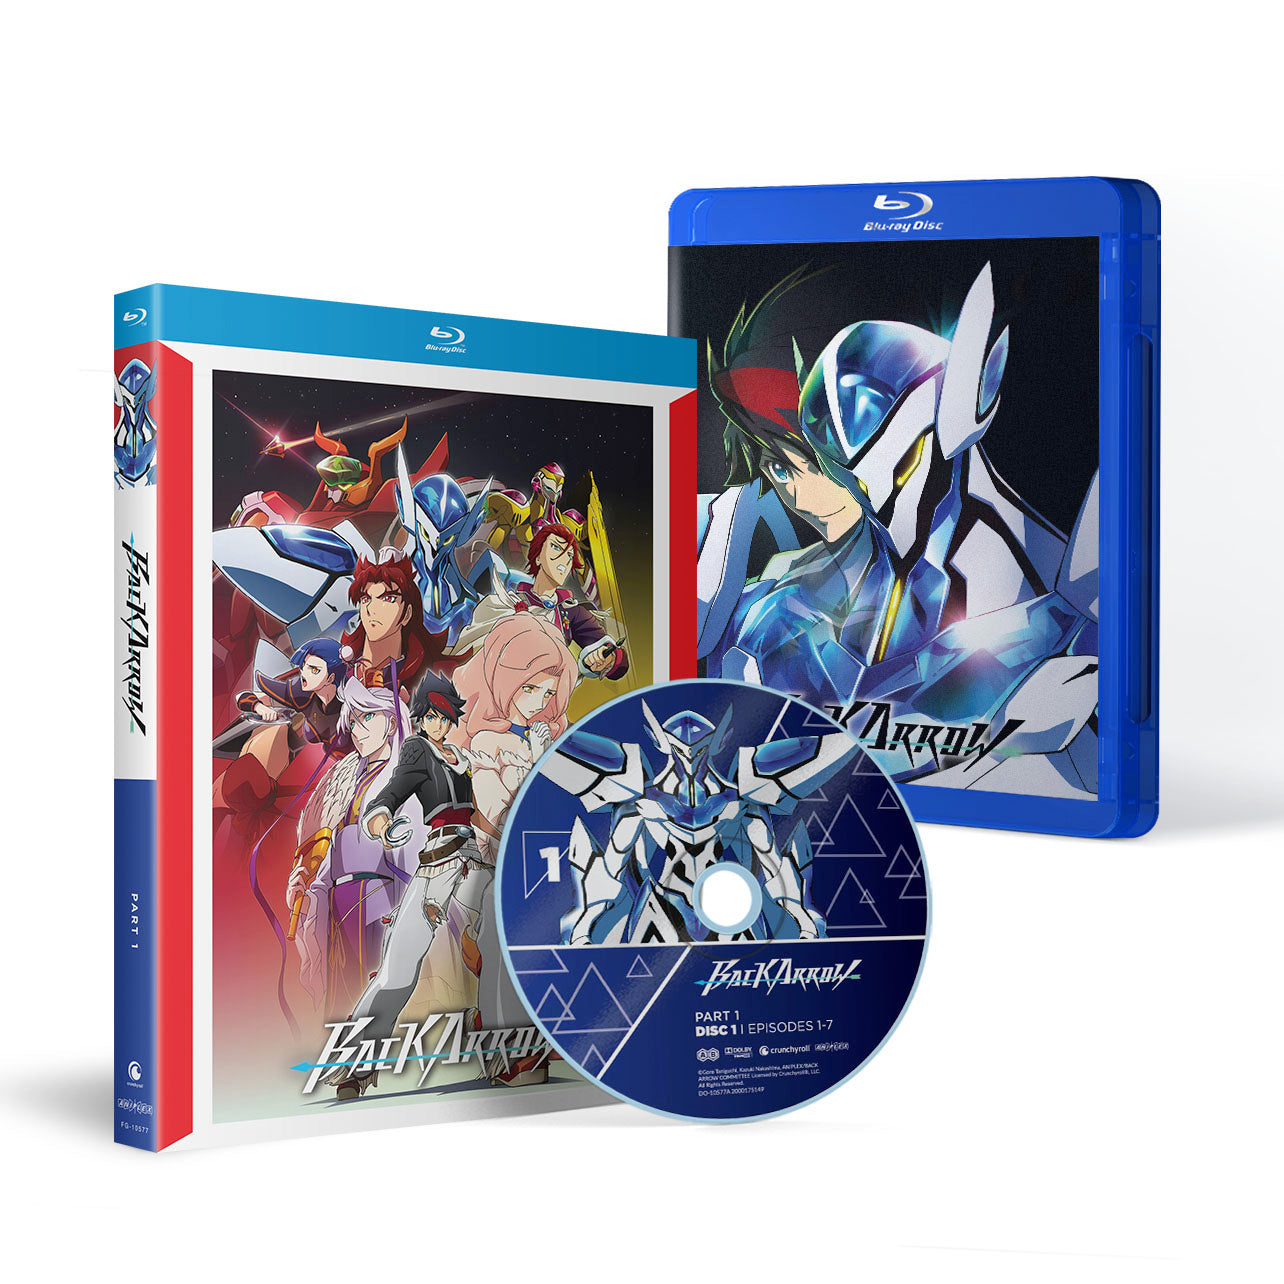 BACK TO THE MEMORIES PART1 Blu-ray